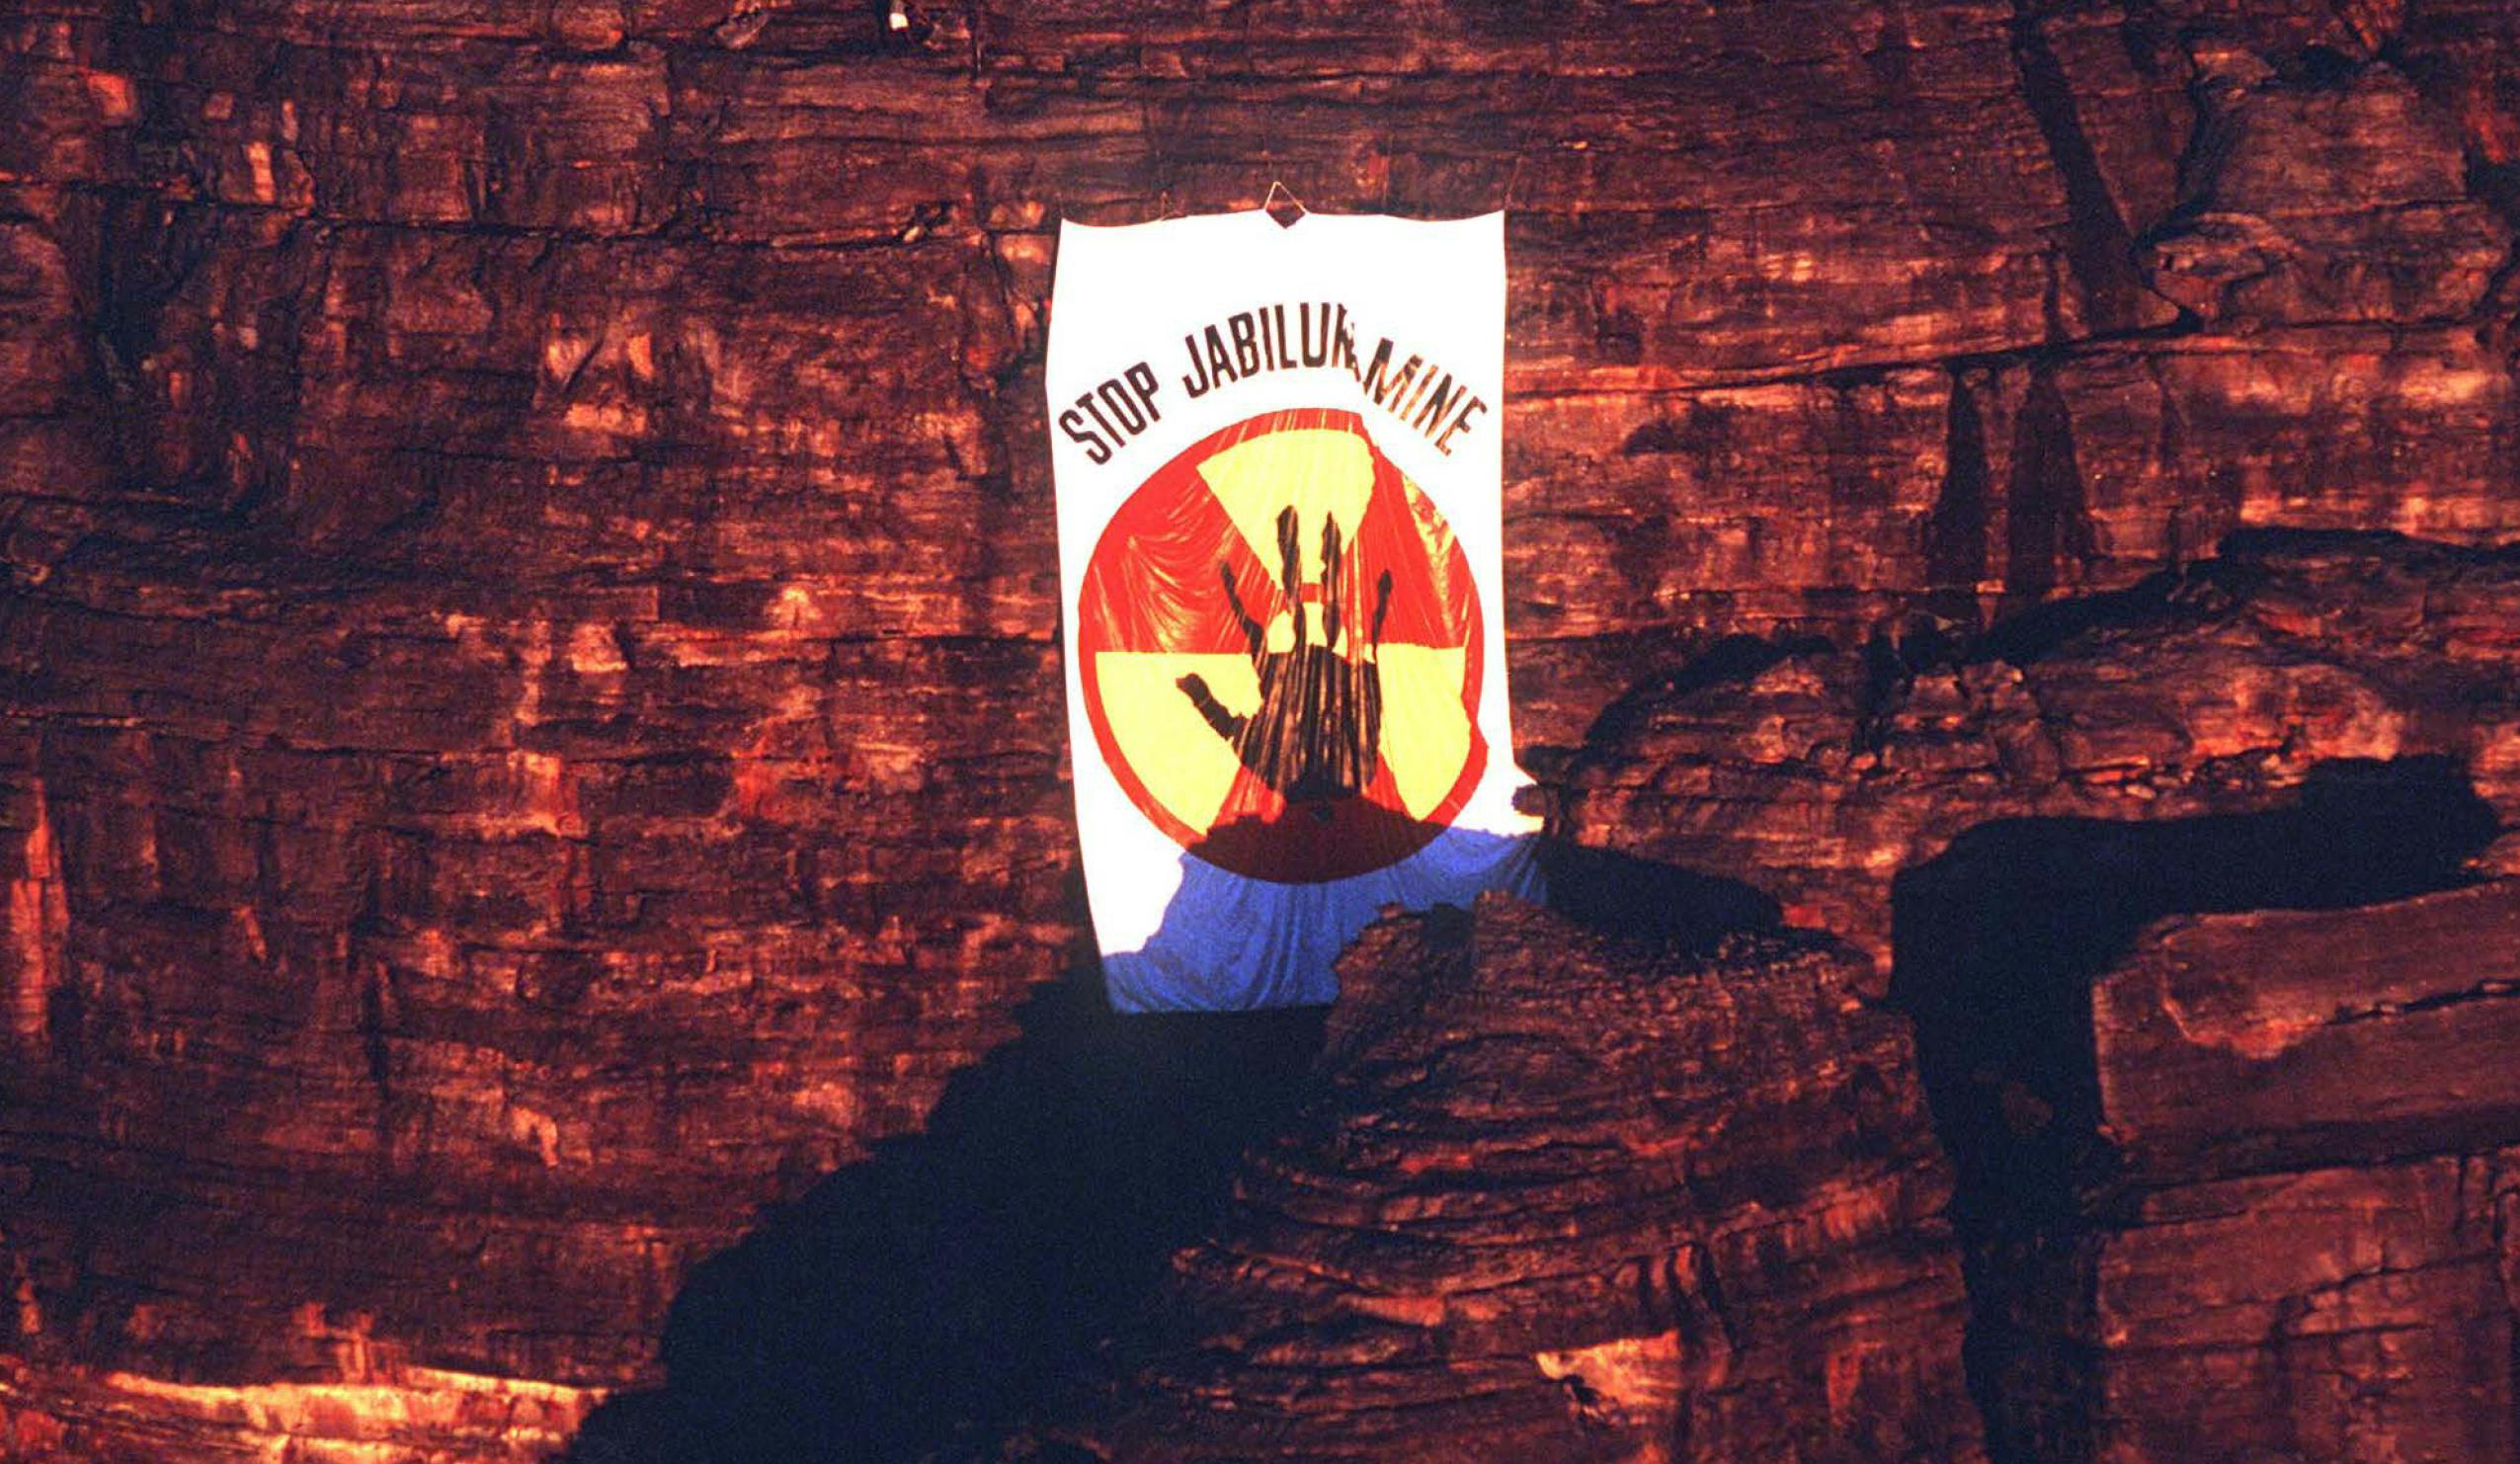 Leave it in the ground: stopping the Jabiluka mine